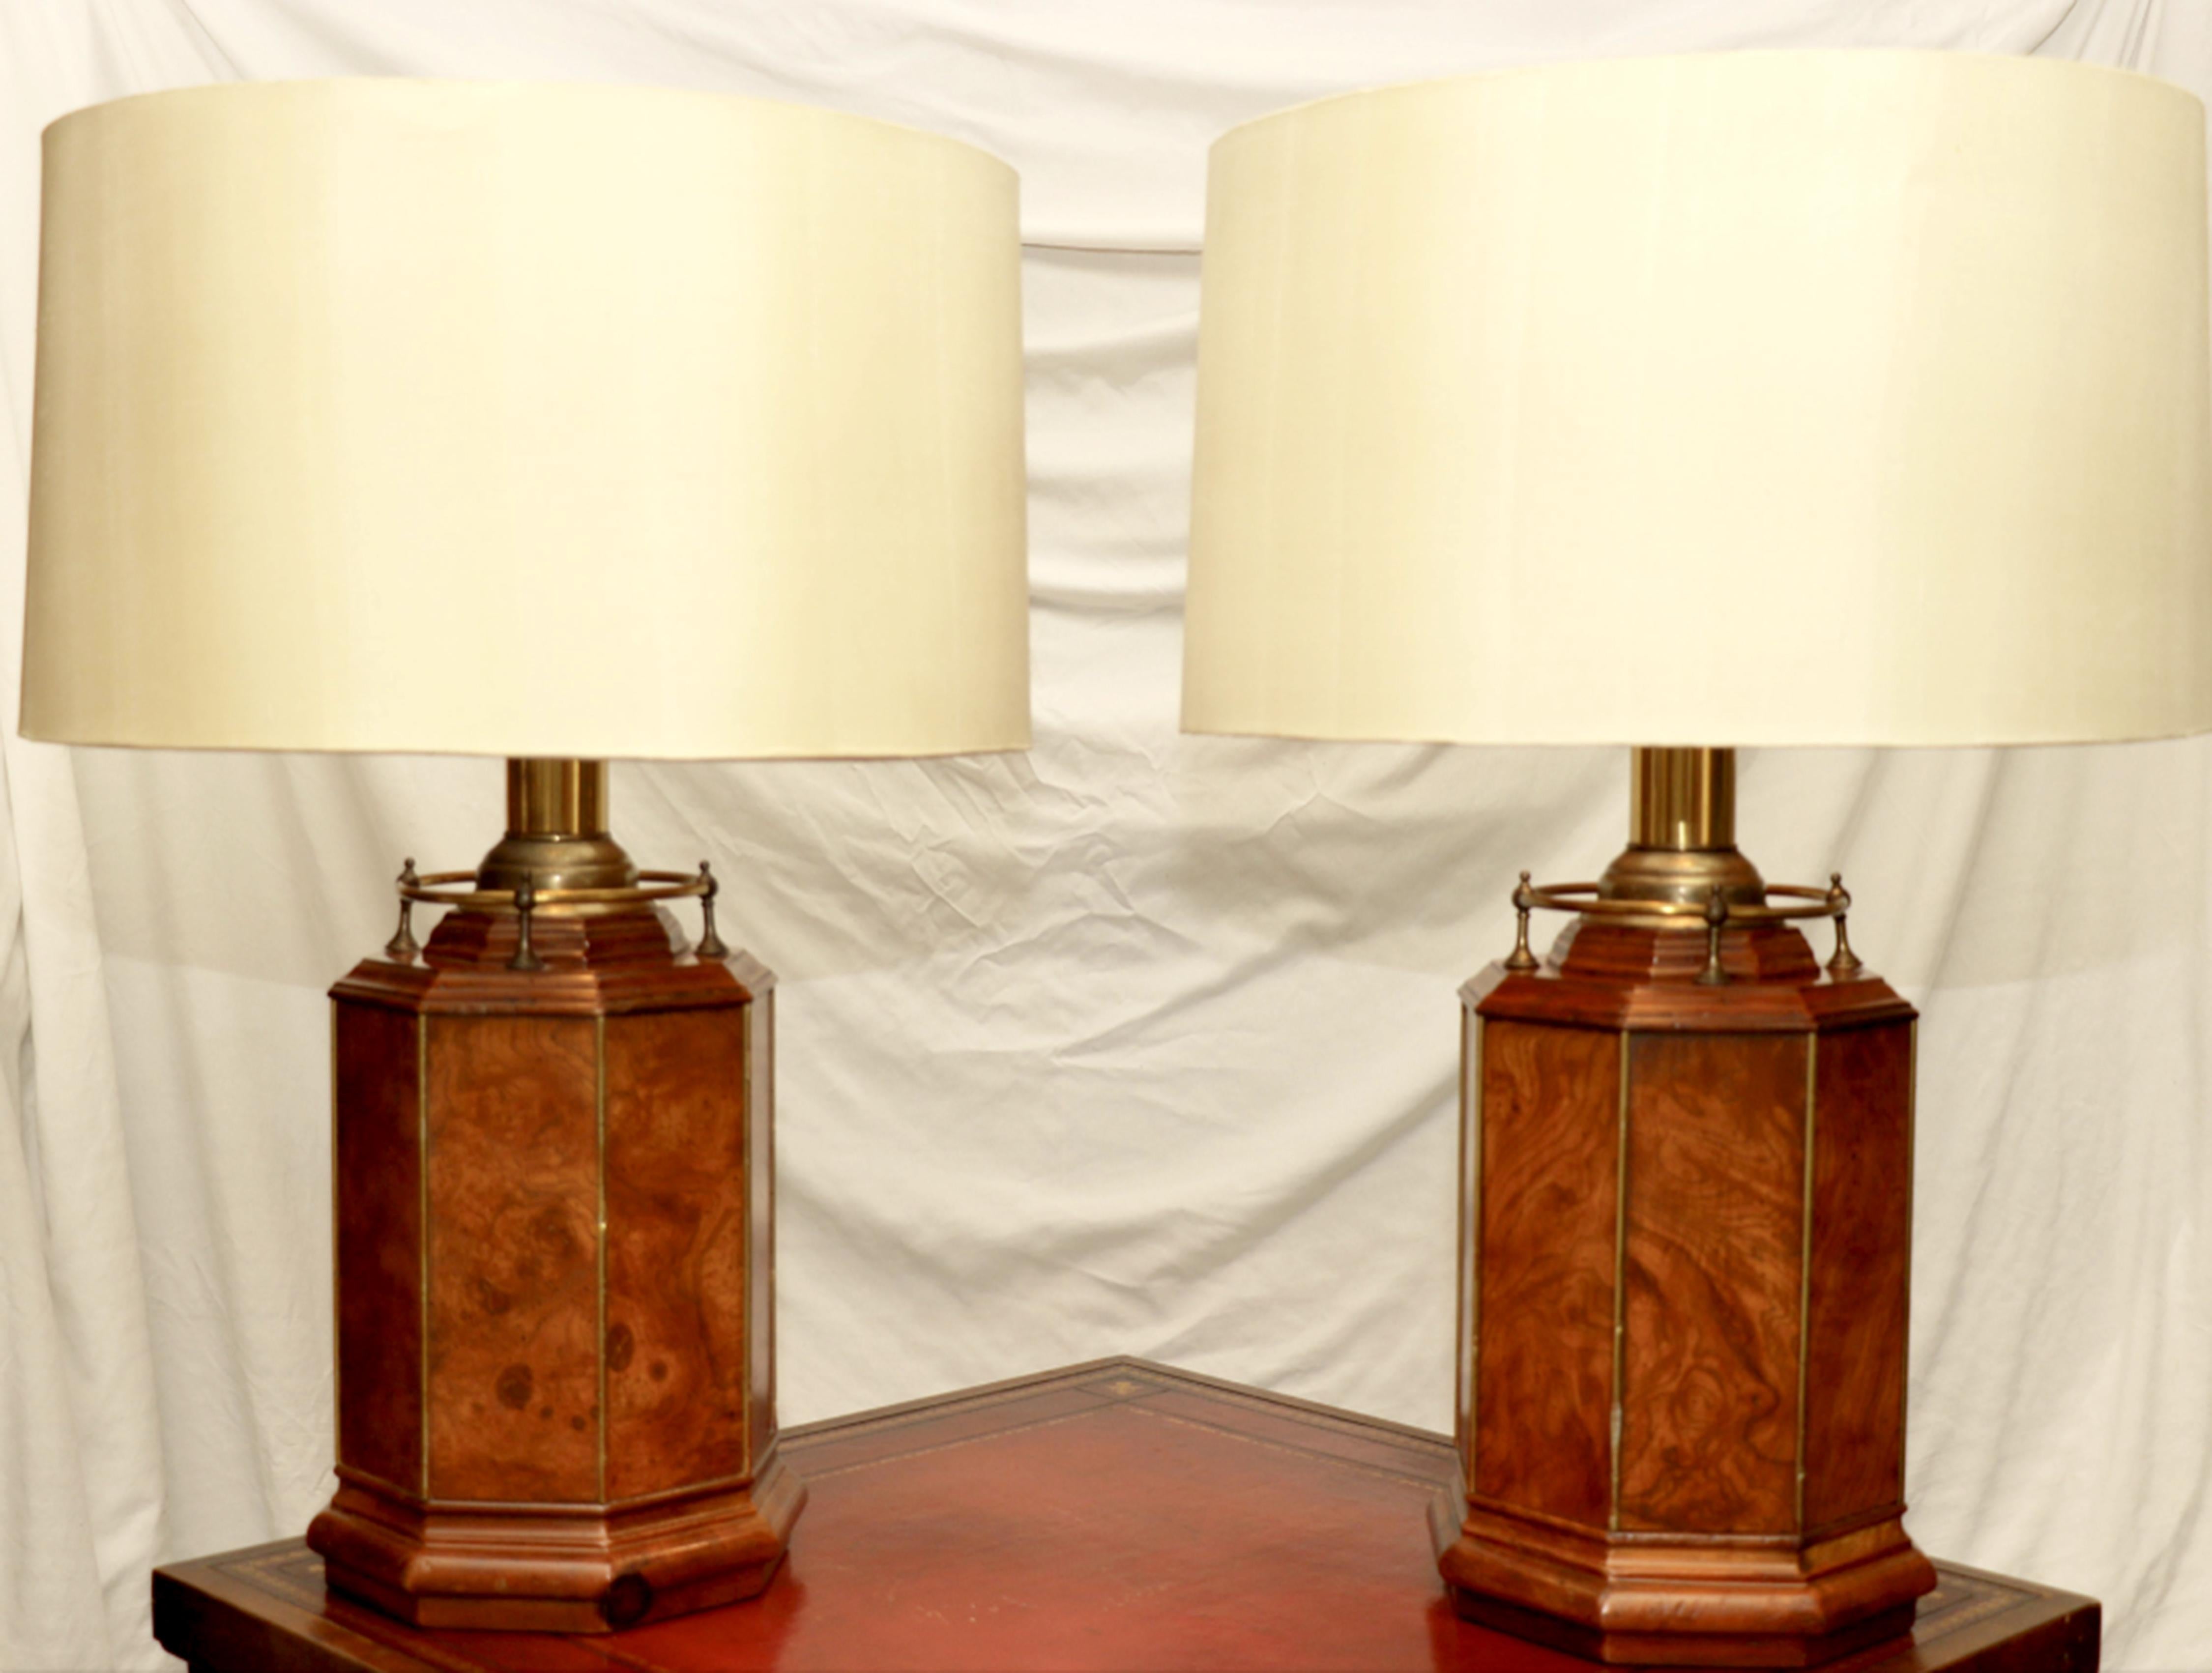 Hand-Crafted Burl Wood Knob Tree Hexagonal Table Lamps